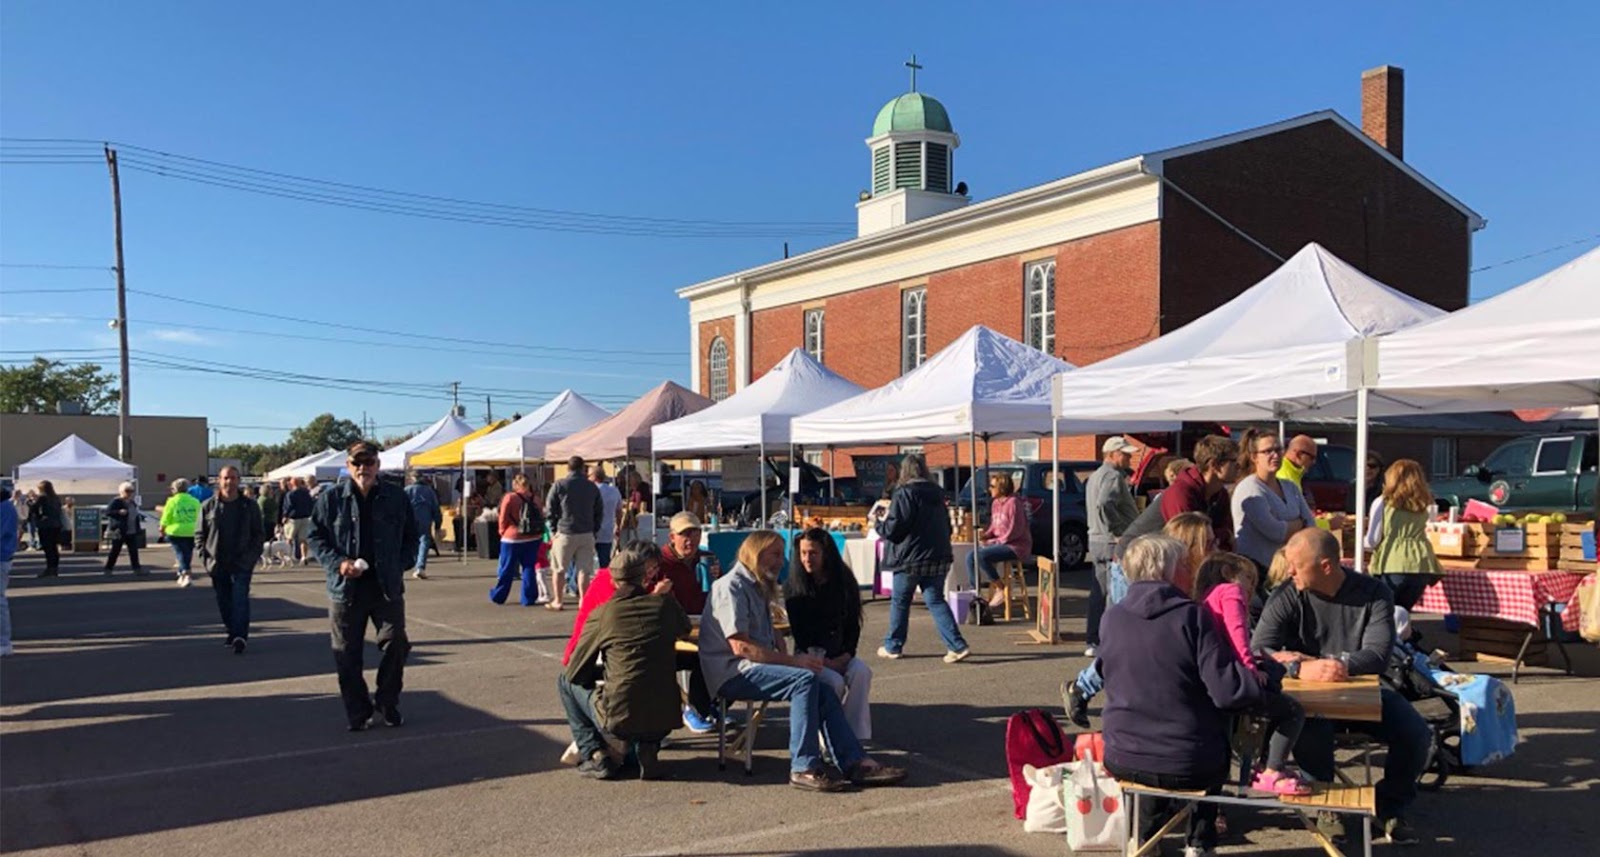 To sample local treats and mingle with many locals, go to the Lancaster Farmers Market.